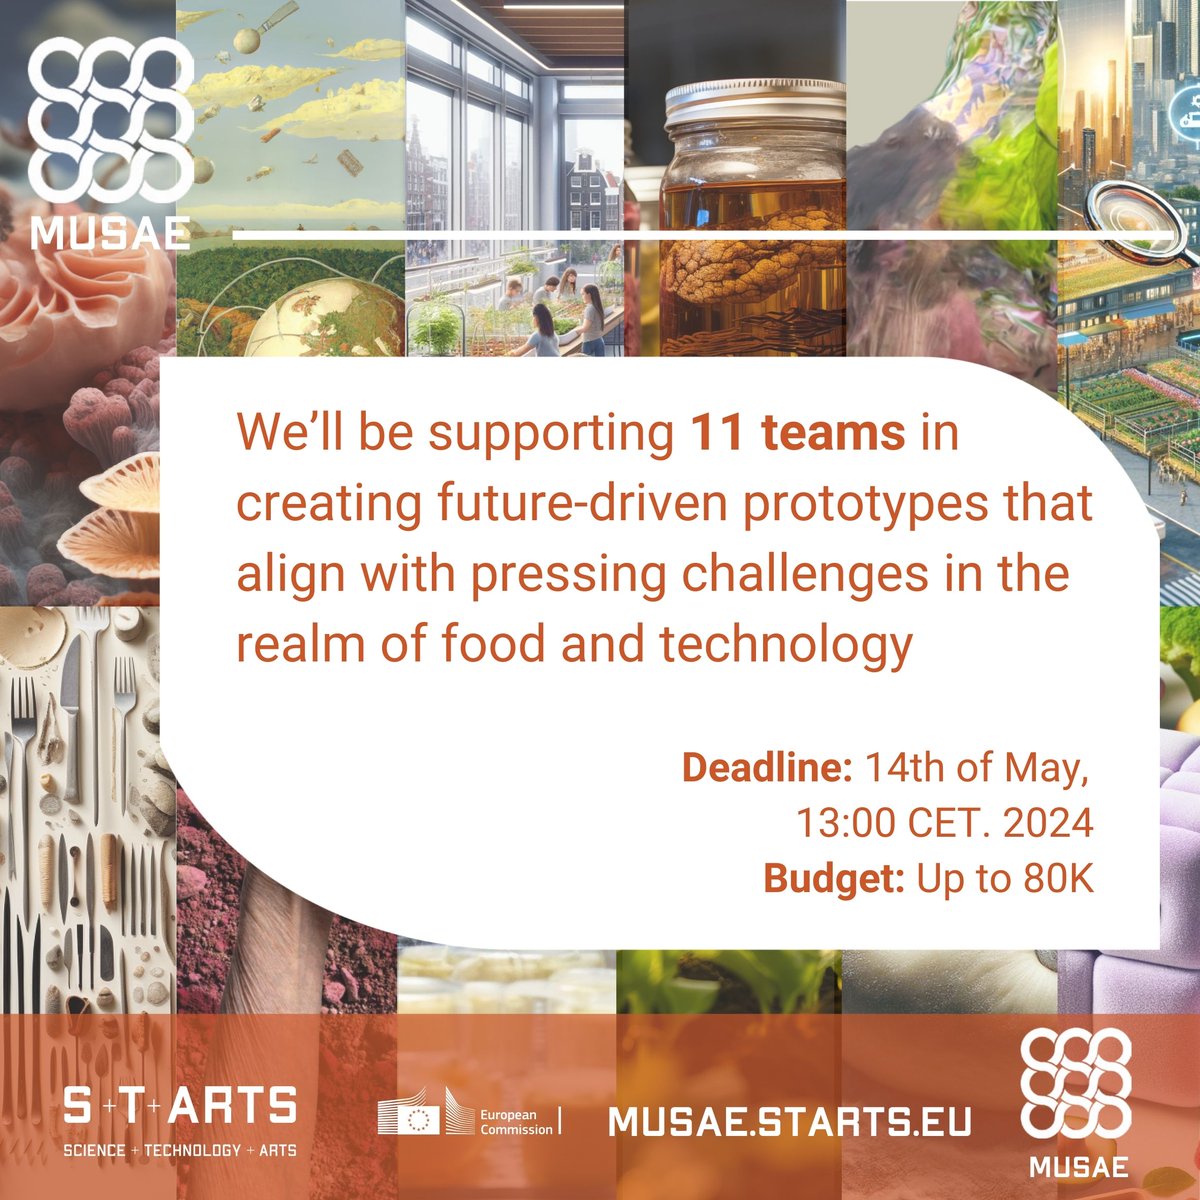 One week is left to apply! MUSAE STARTS 2nd Open Call ! 1 Company + 1 Artist We’ll be supporting 11 teams in creating future-driven prototypes that align with pressing challenges in the realm of food and technology. Until May 14th, 2024 Up to 80K Apply starts.eu/open-call-arti…